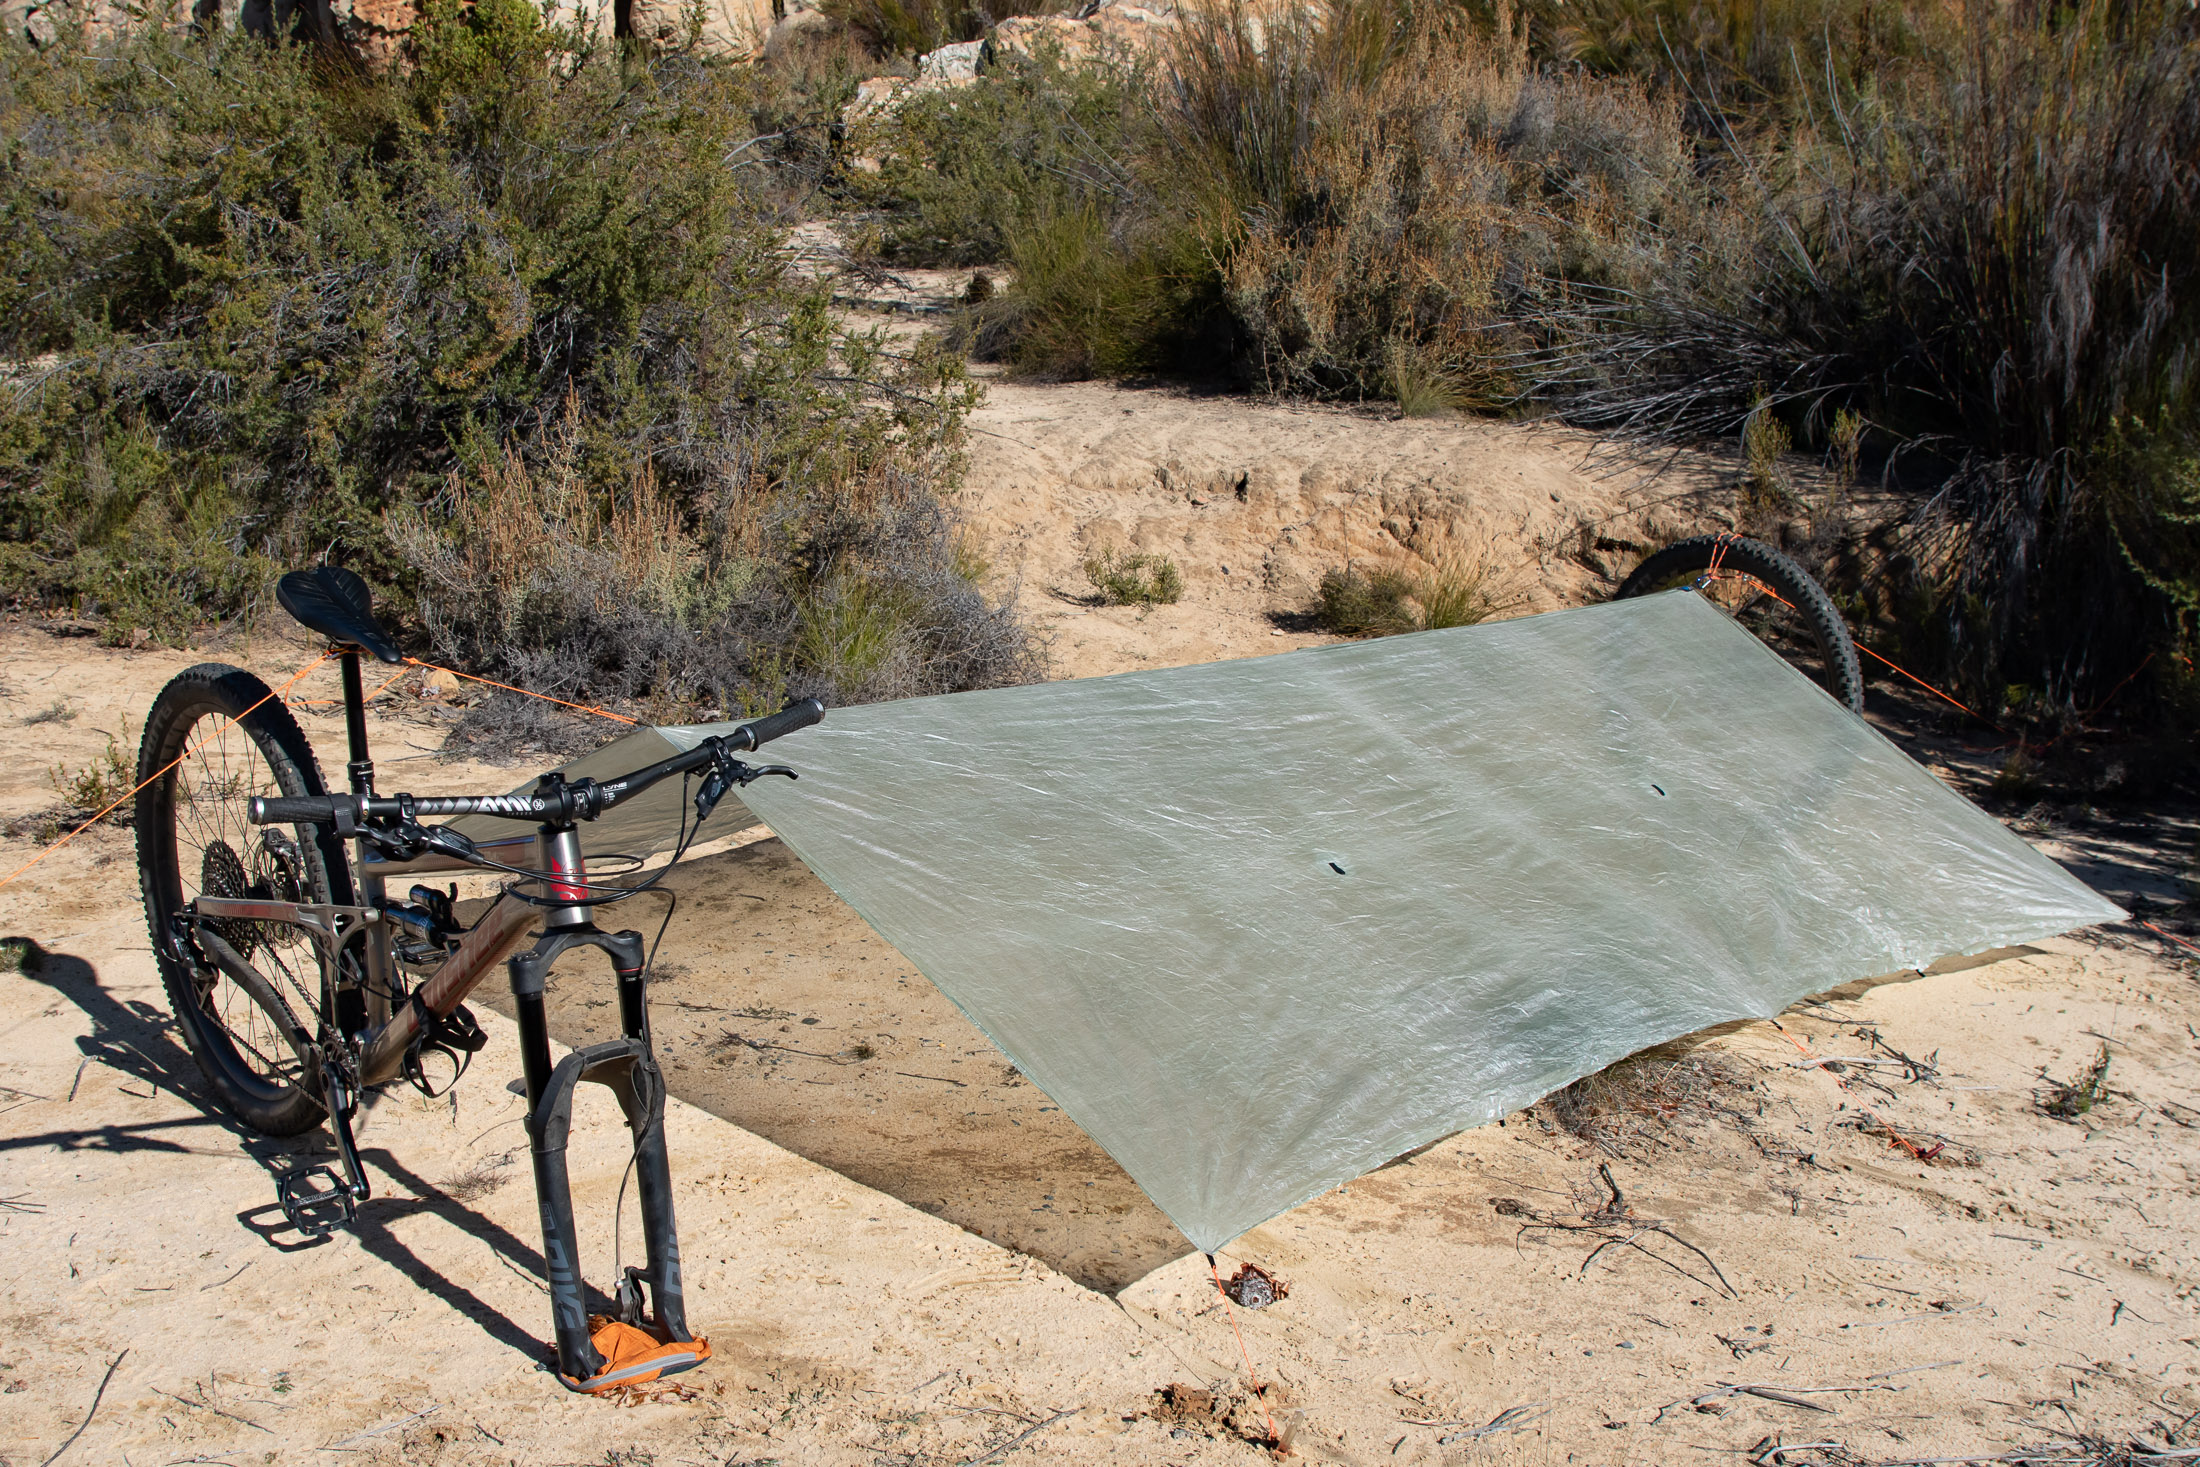 tarp rigged with bike for support